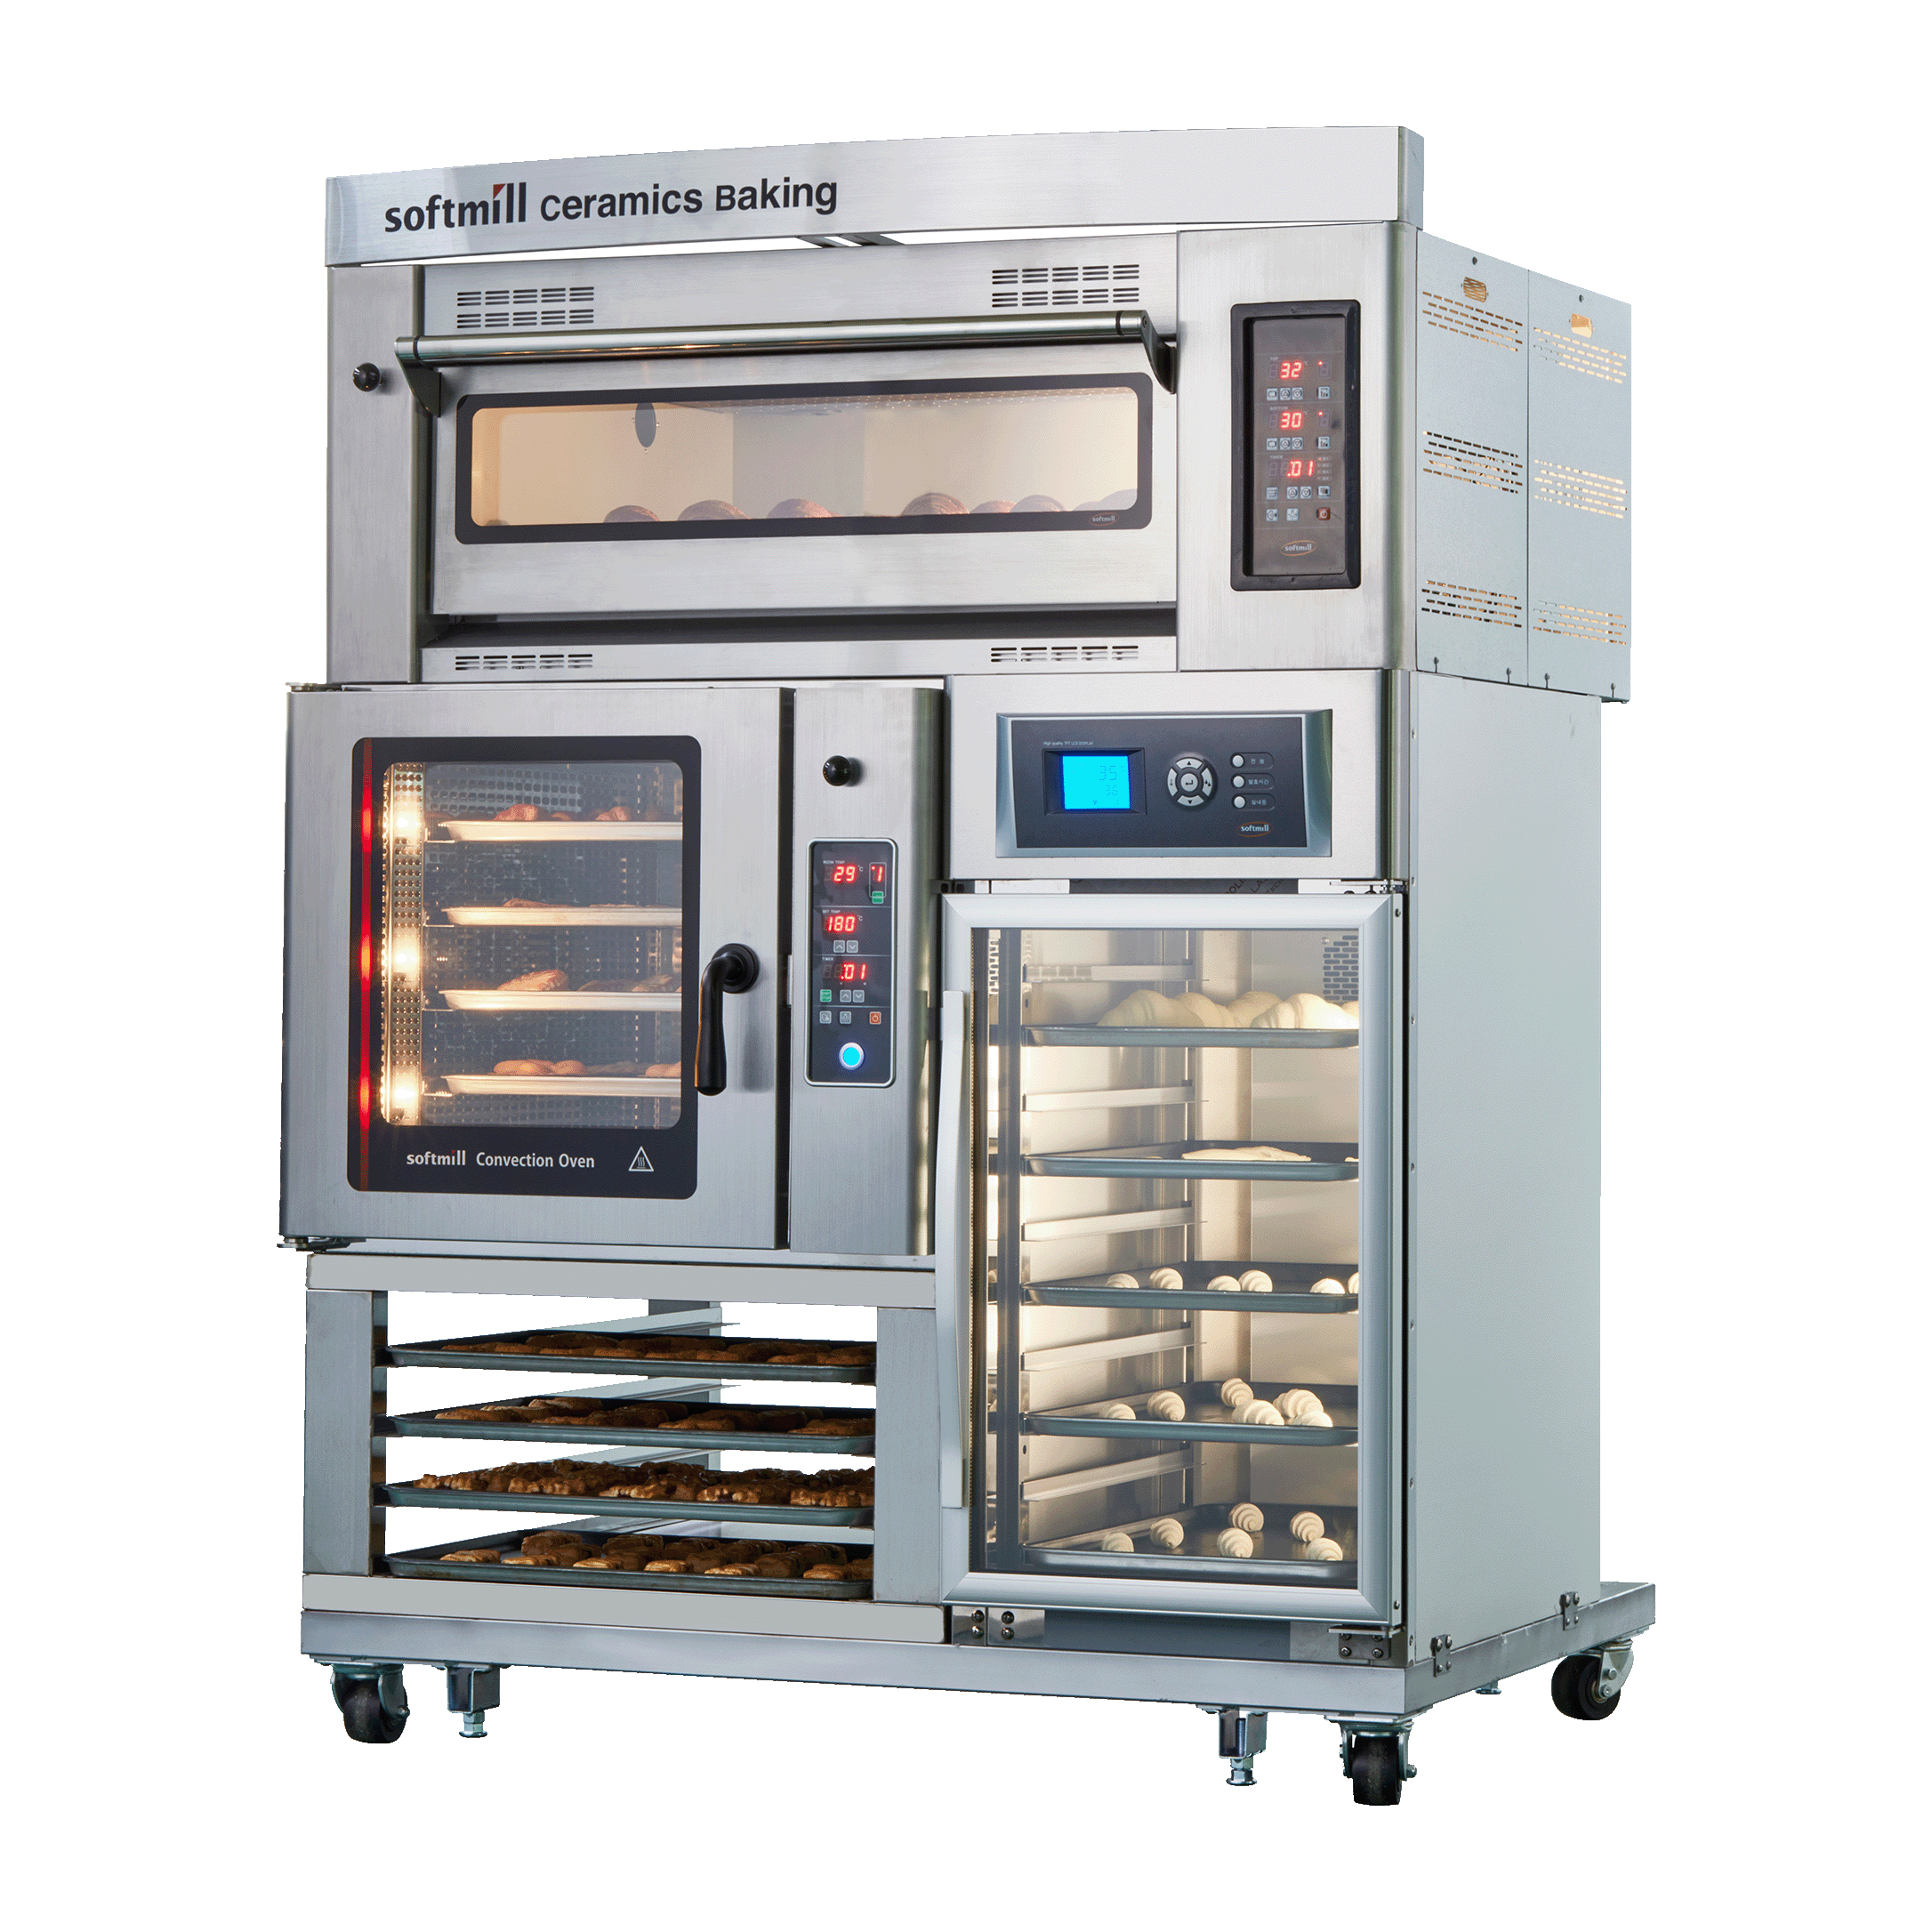 Combi Oven detail page link